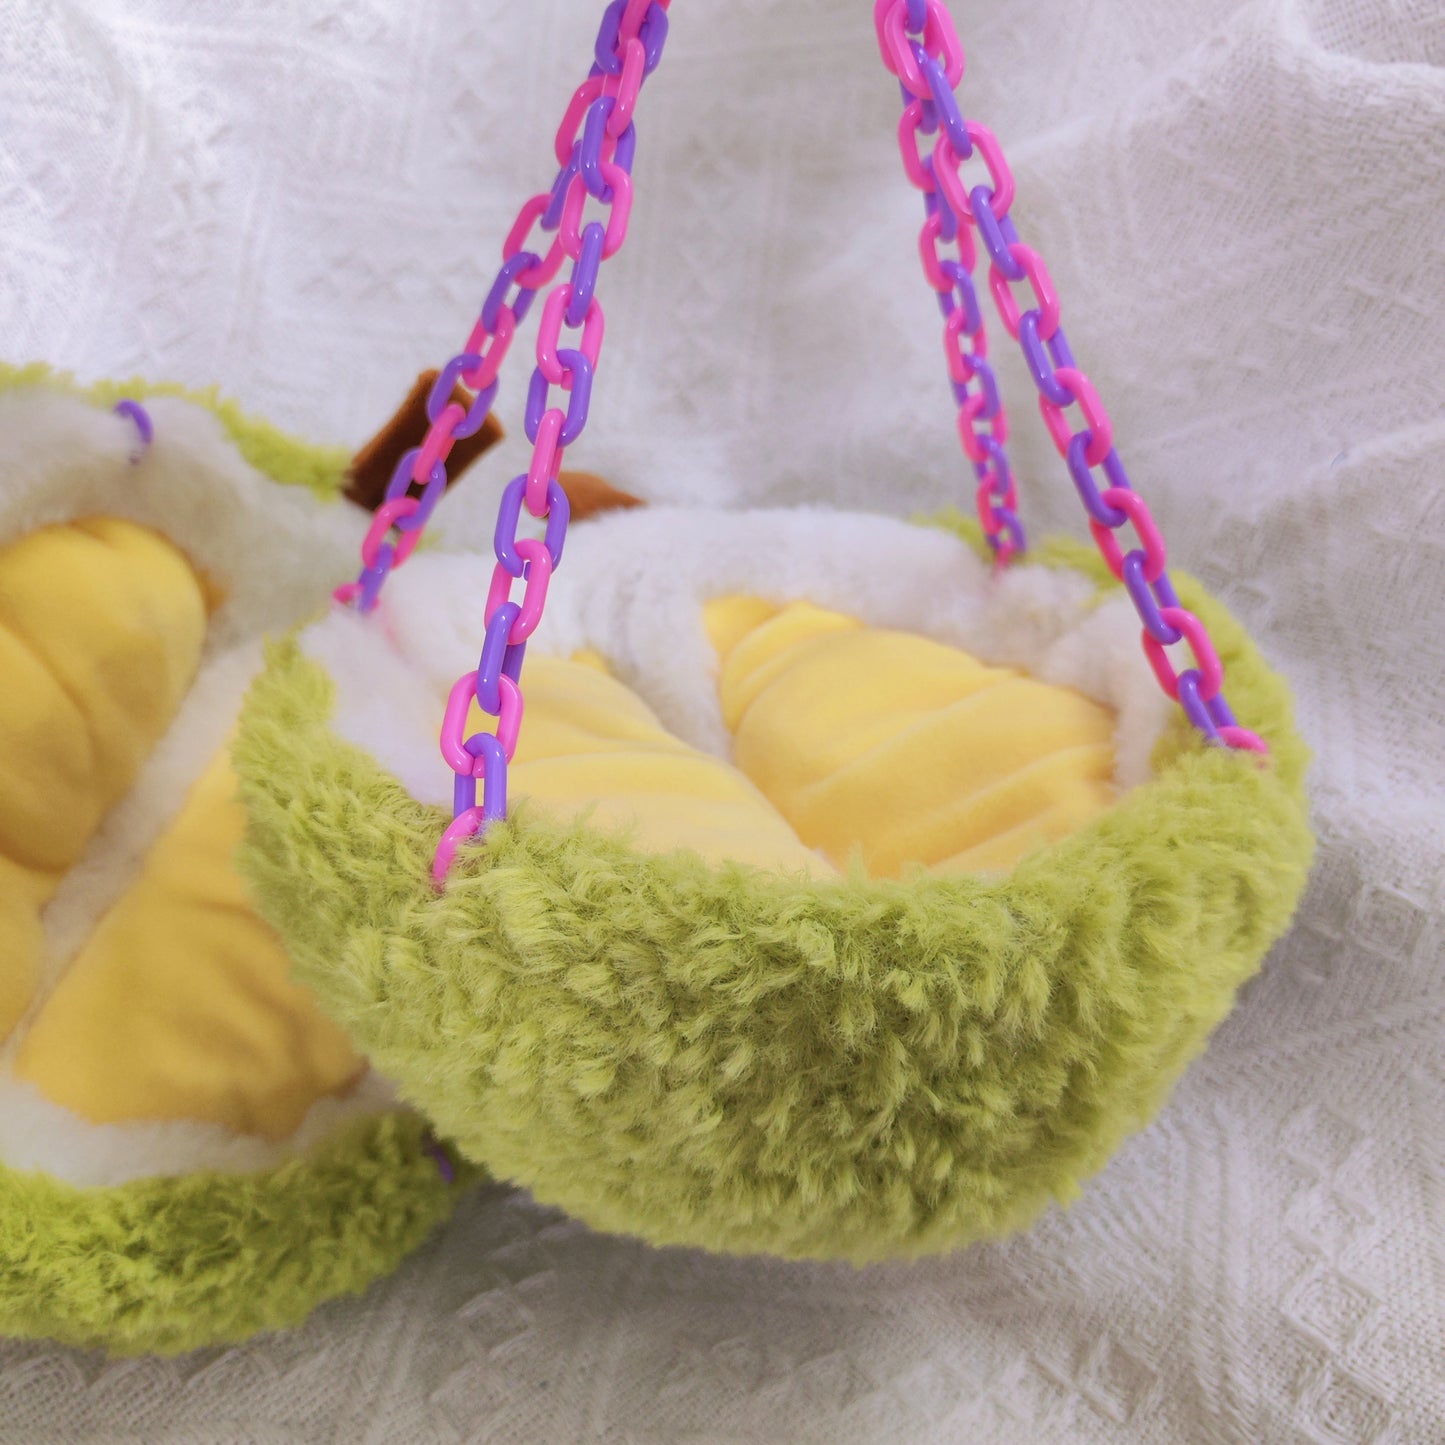 Crafted Green-Yellow Parrot Bird Durian Design Nest with Hooks & Plastic Chains, Hanging Birdhouse for Cage, Cotton-Filled Half-Moon Shape, Comfy Sleeping Spot for Pet Birds